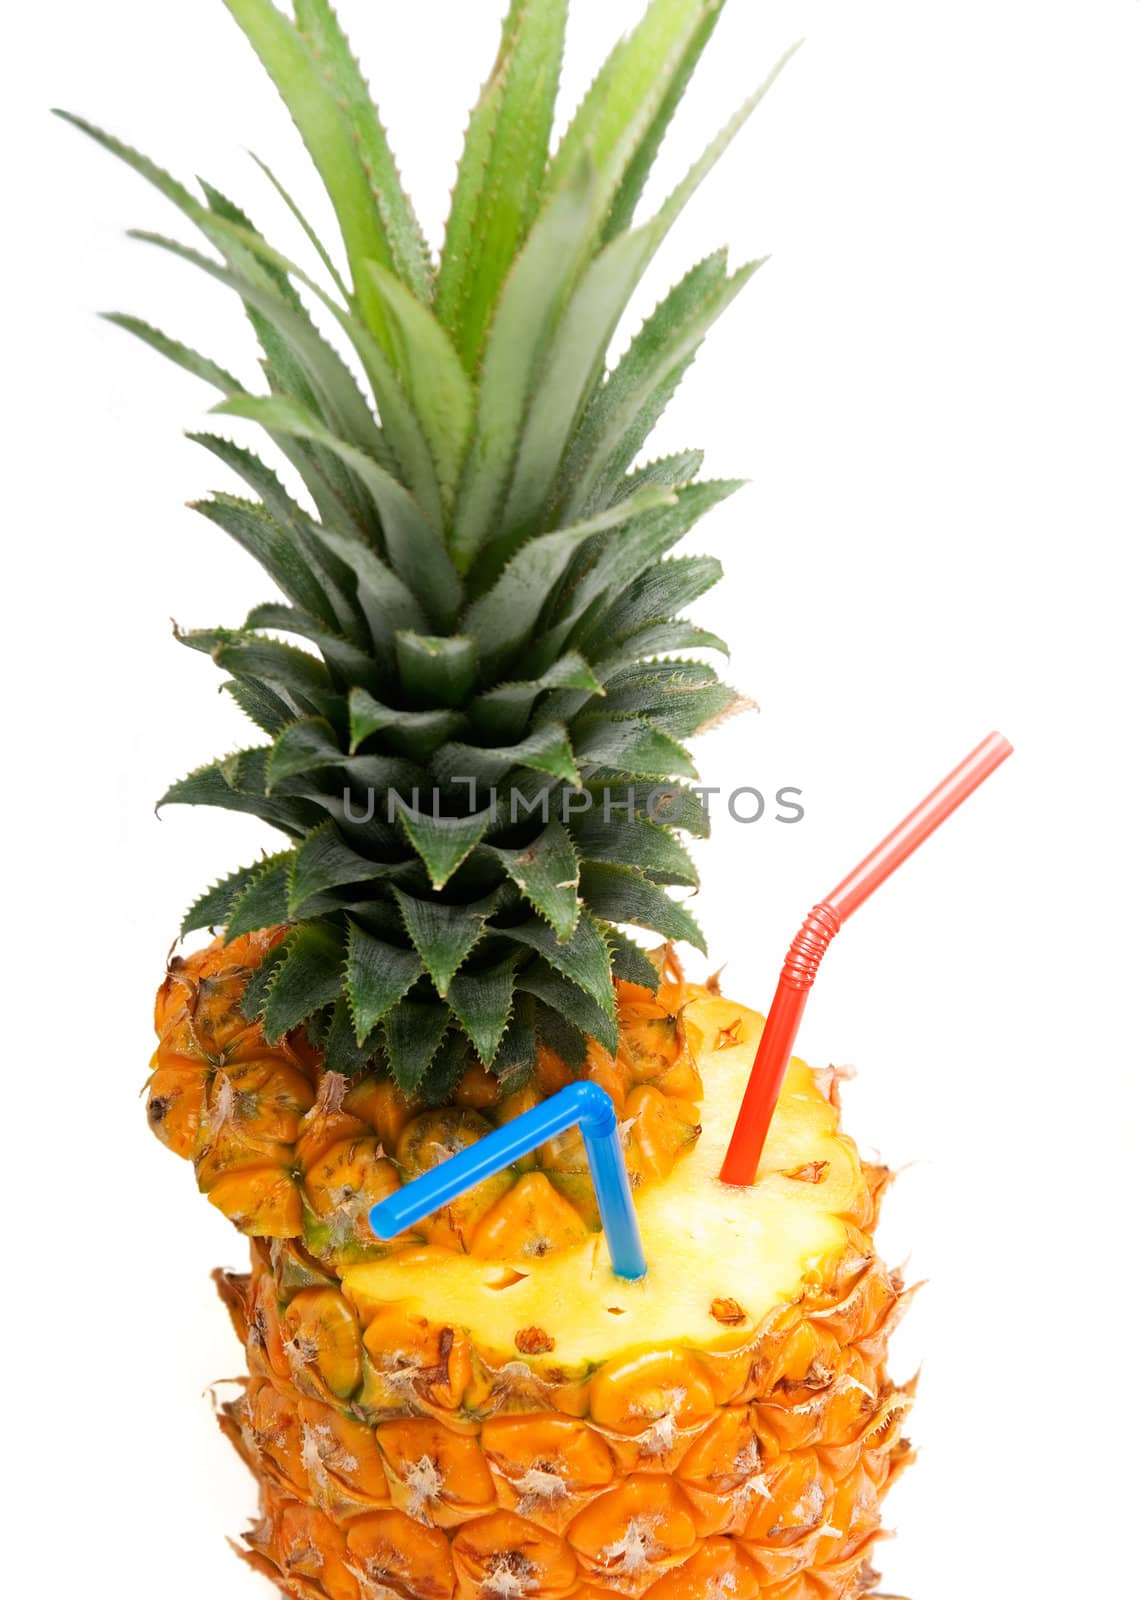 ripe pineapple cutted on top with red and blue straws isolated on white background